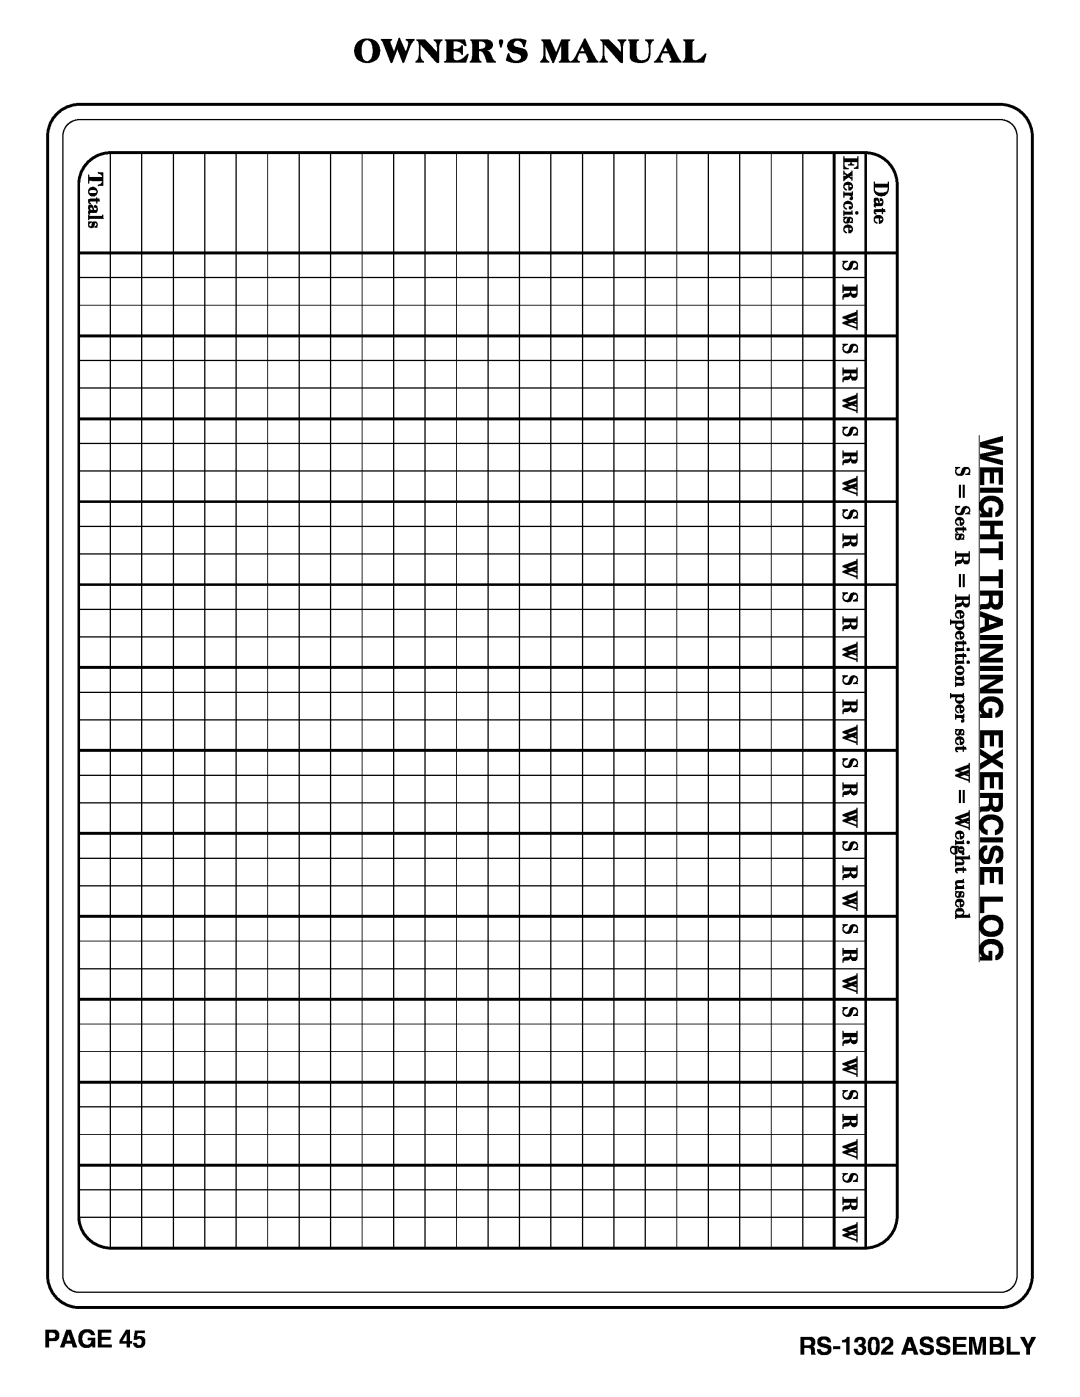 Hoist Fitness RS-1302 Weight Training Exercise Log, S = Sets R = Repetition per set W = Weight used Date, Totals 